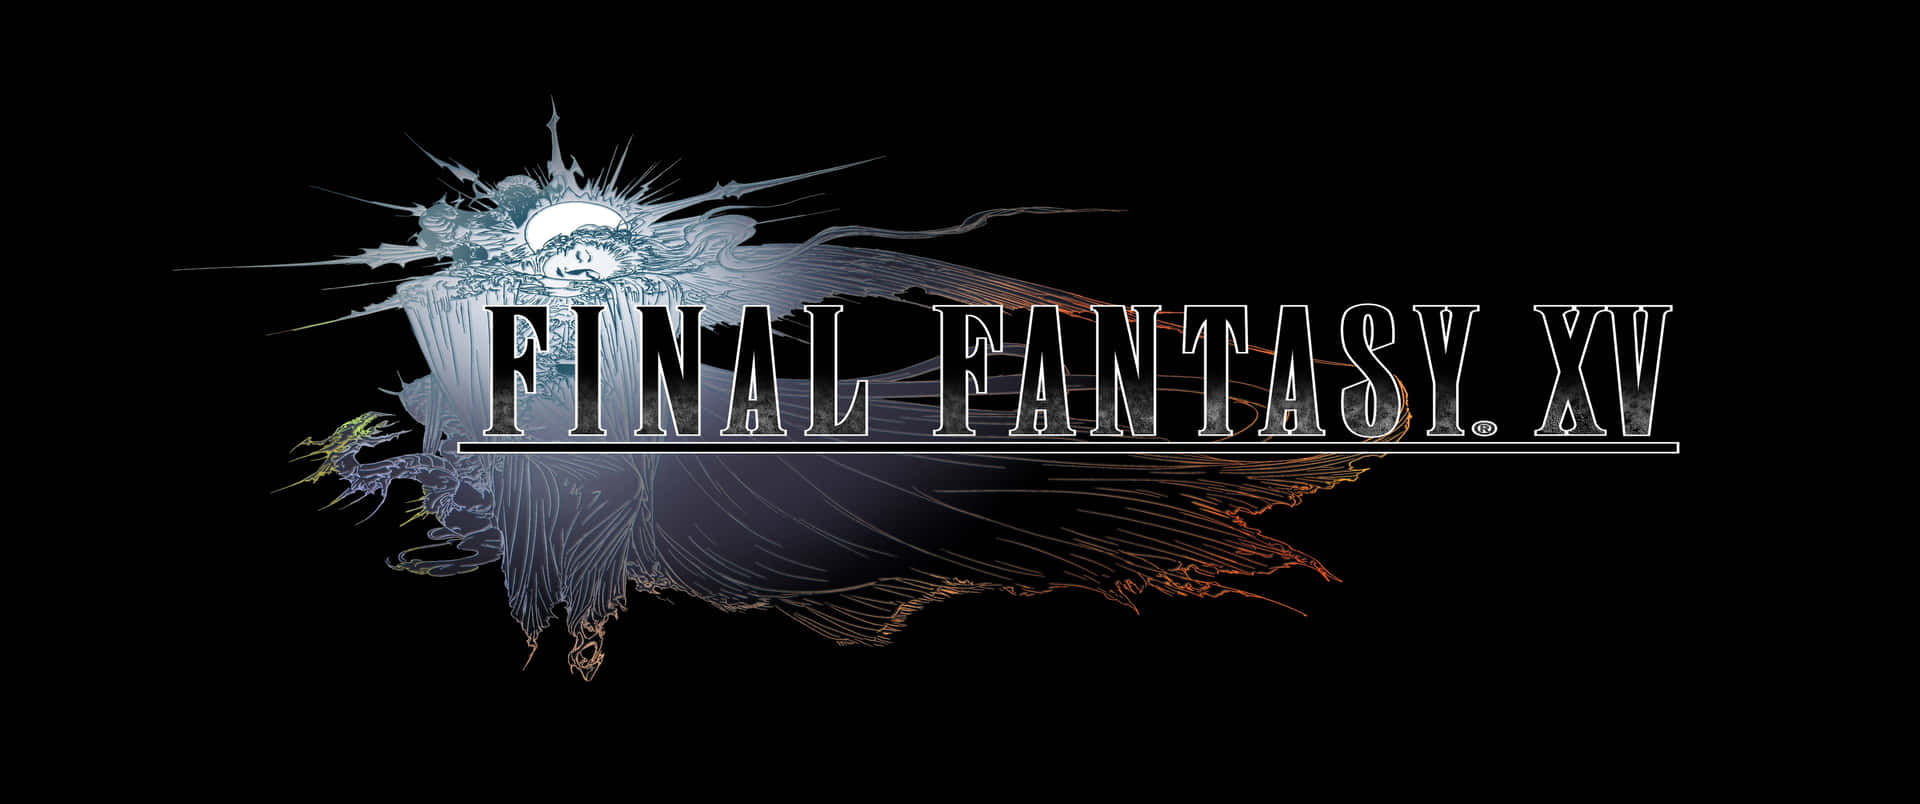 "Explore the world of Eos with Final Fantasy XV"